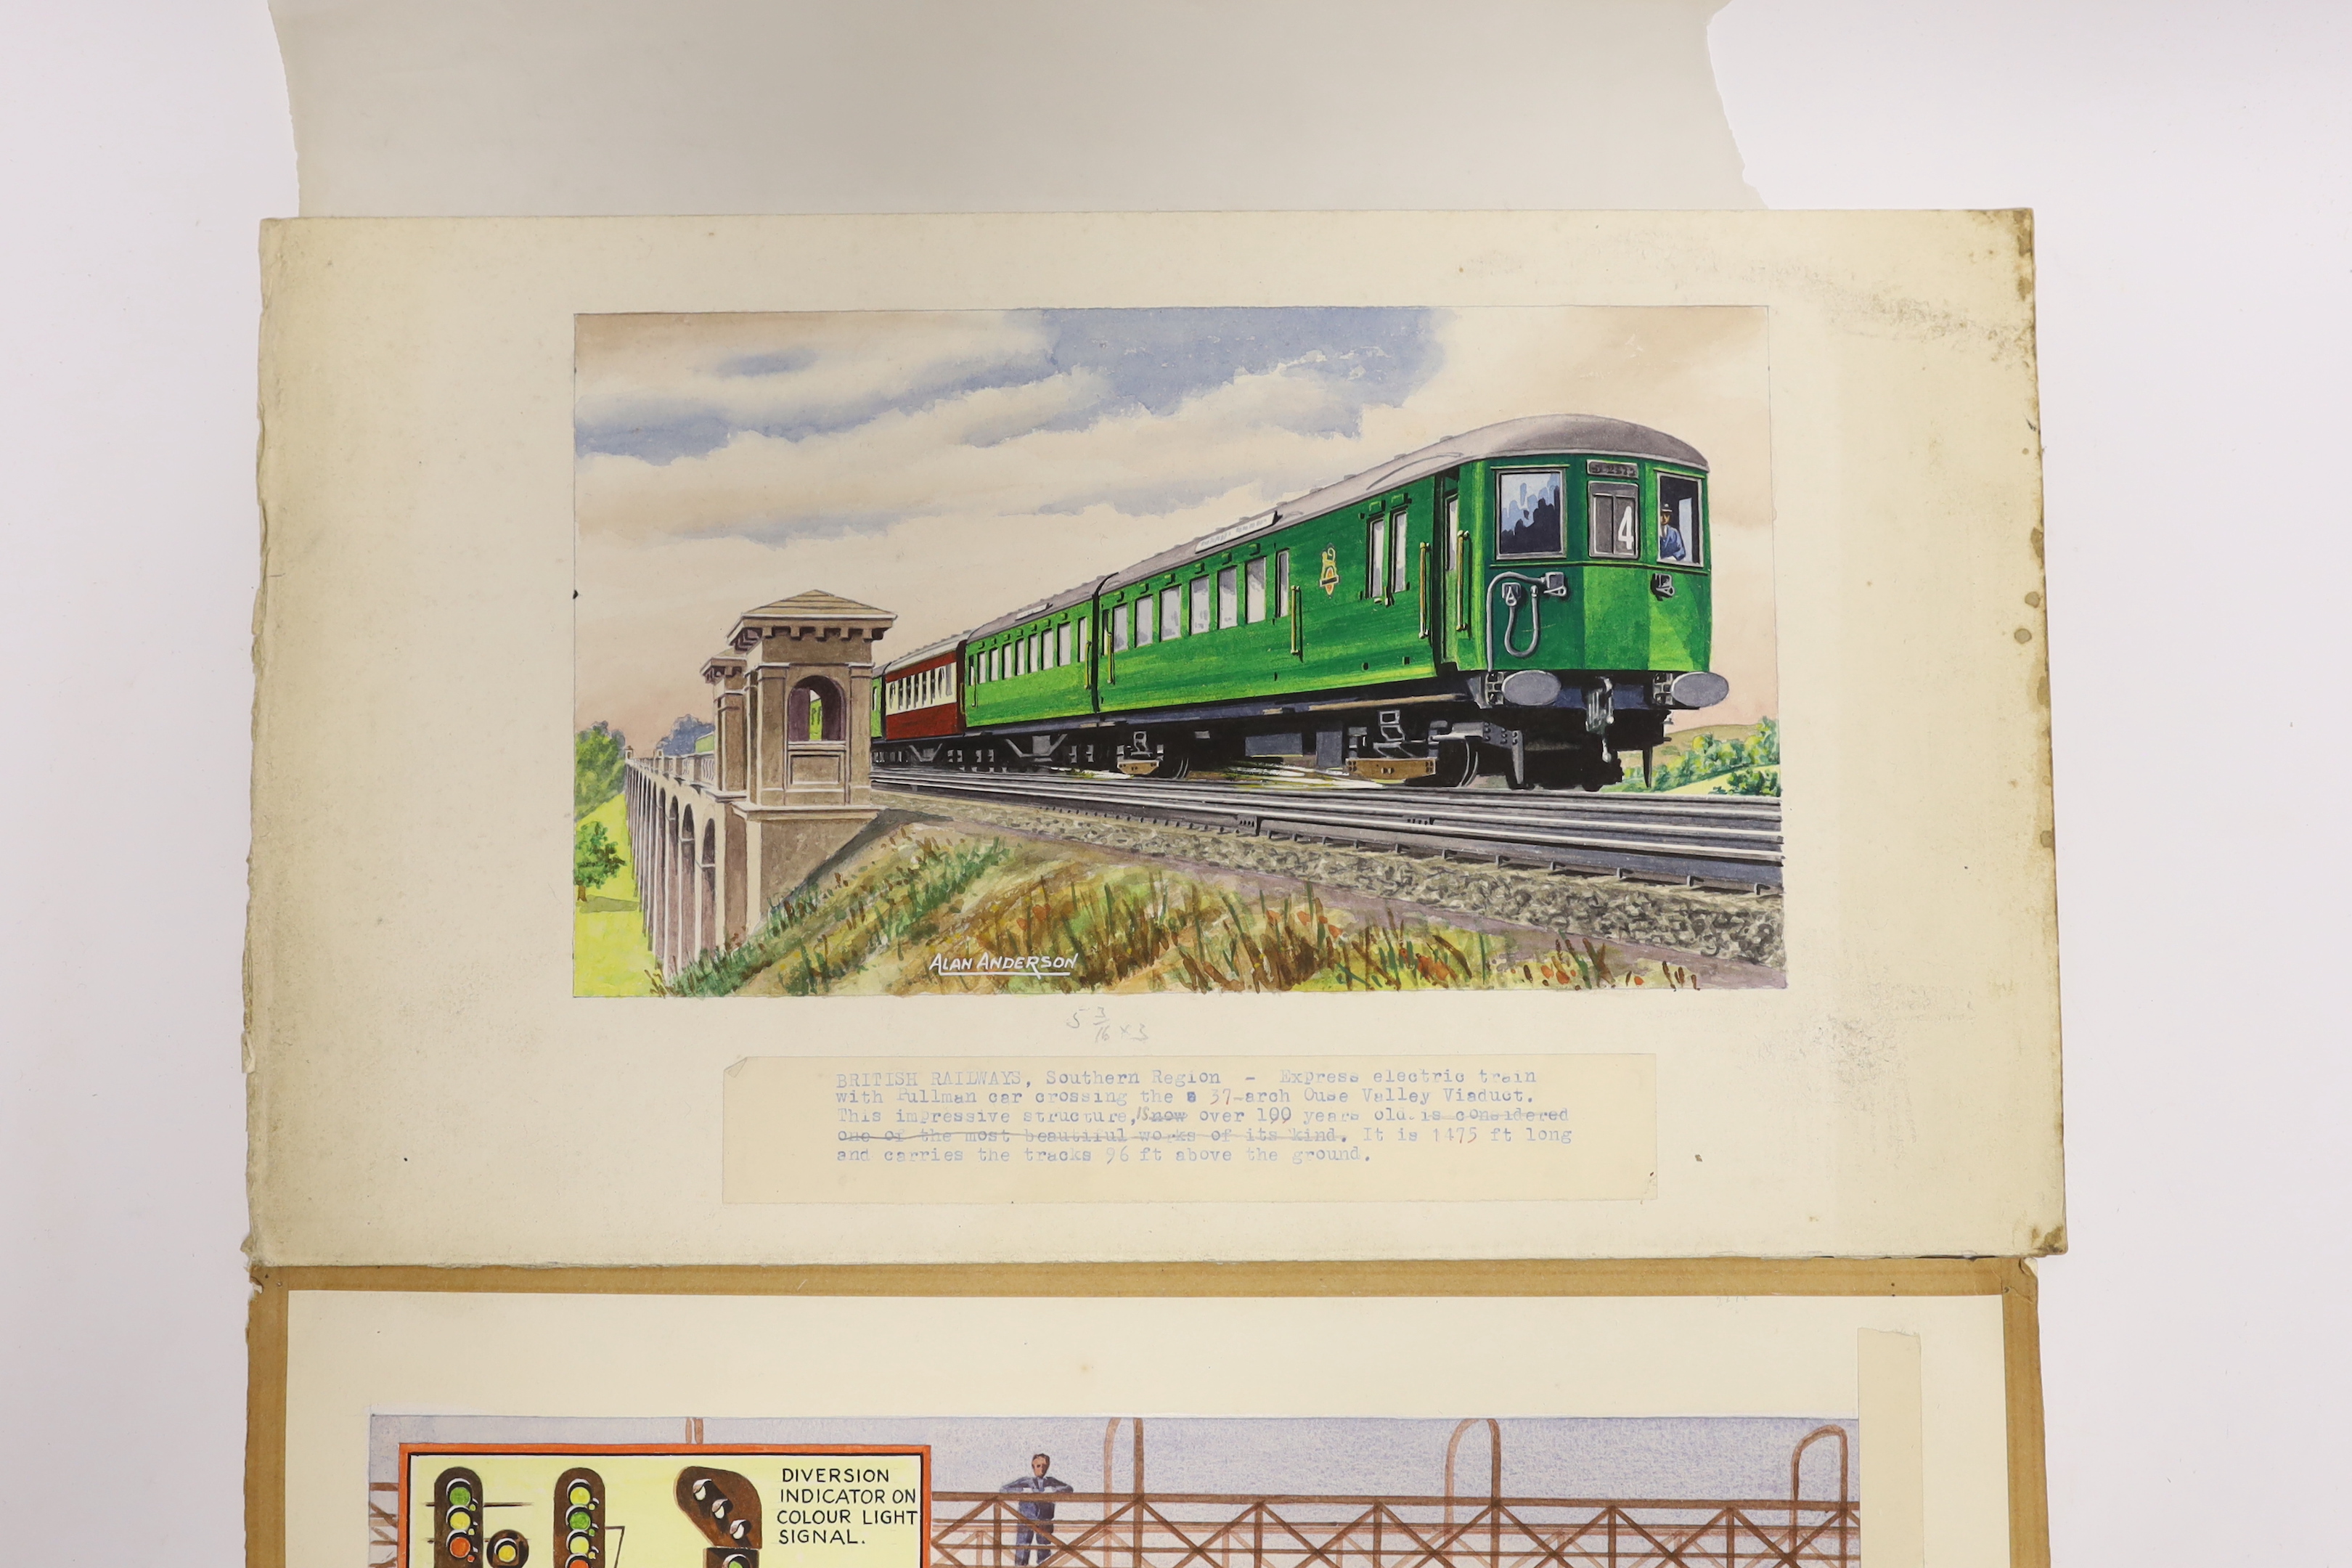 Alan Anderson, two watercolours, a BR SR Pullman EMU, 15 x 26.5cm and a Southern Railway Pullman EMU, 15.5 x 27cm, both signed